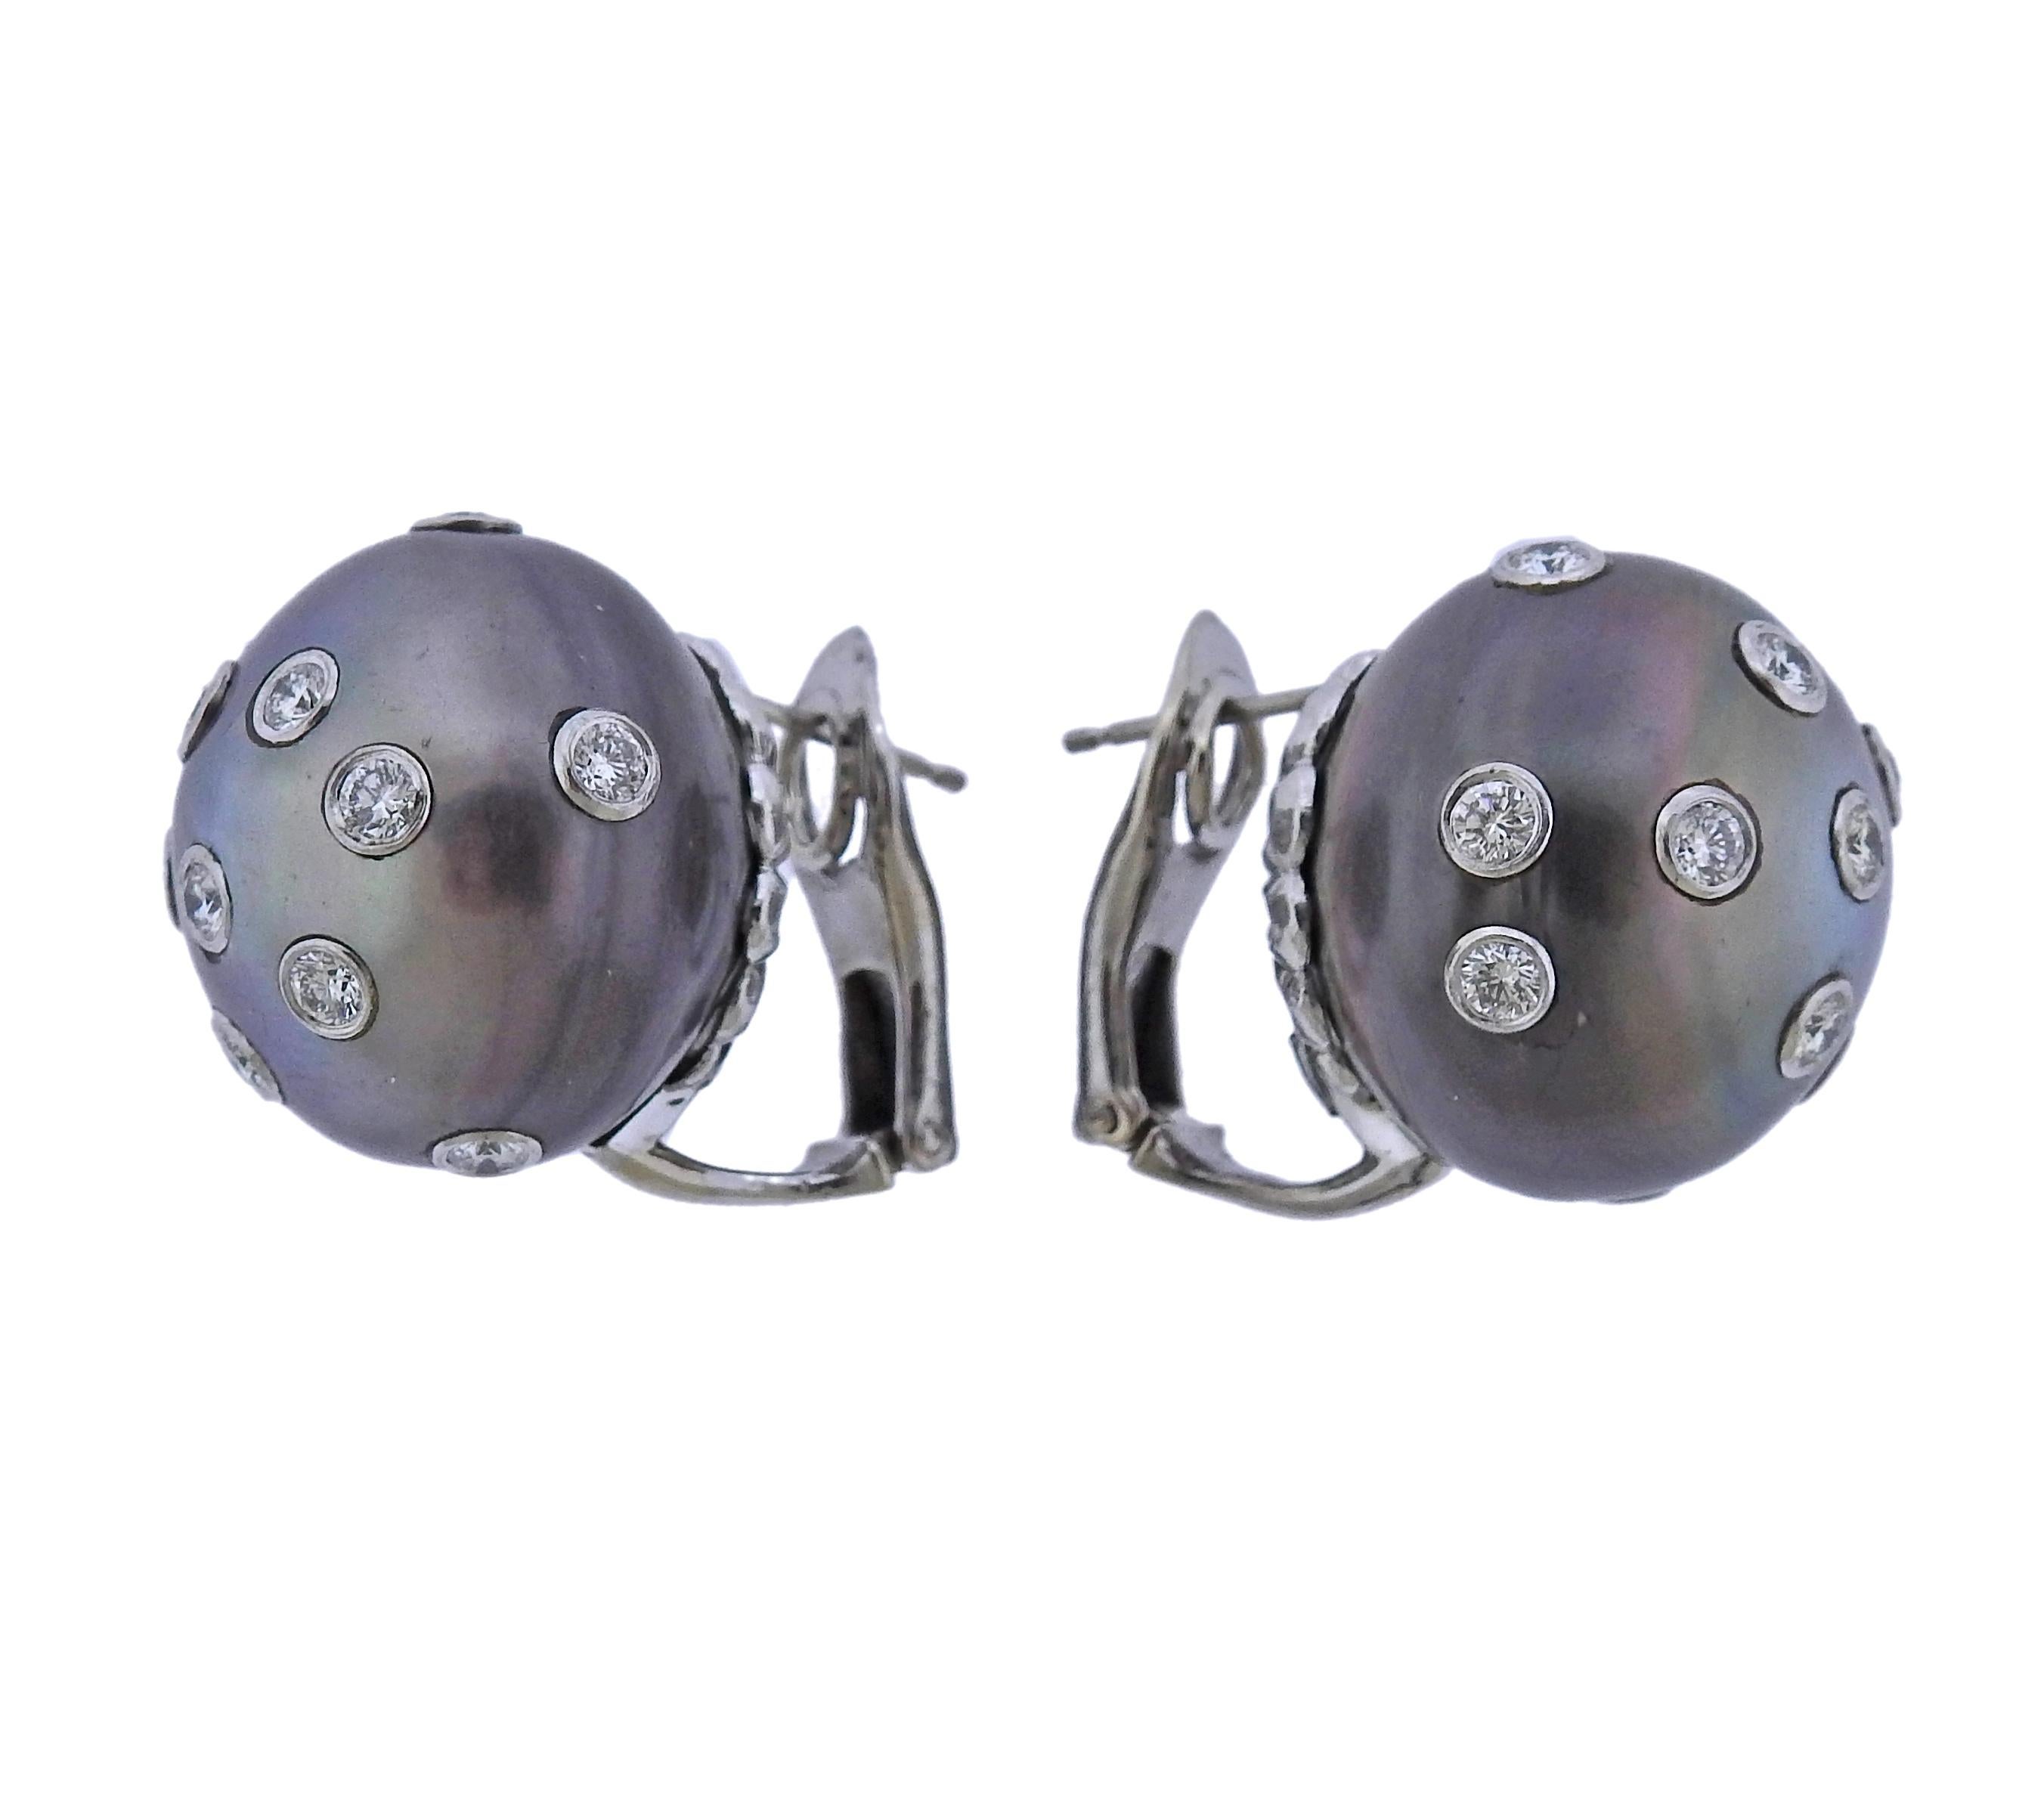 Pair of  platinum new without tags earrings by Assael, with 19.4mm South Sea Tahitian pearls and 1.32ctw G/VS diamonds. Retail $27200. Come with pouch.  Earrings are 19.4-19.5mm in diameter. Weight - 30.8 grams. Marked: Assael, PT950.